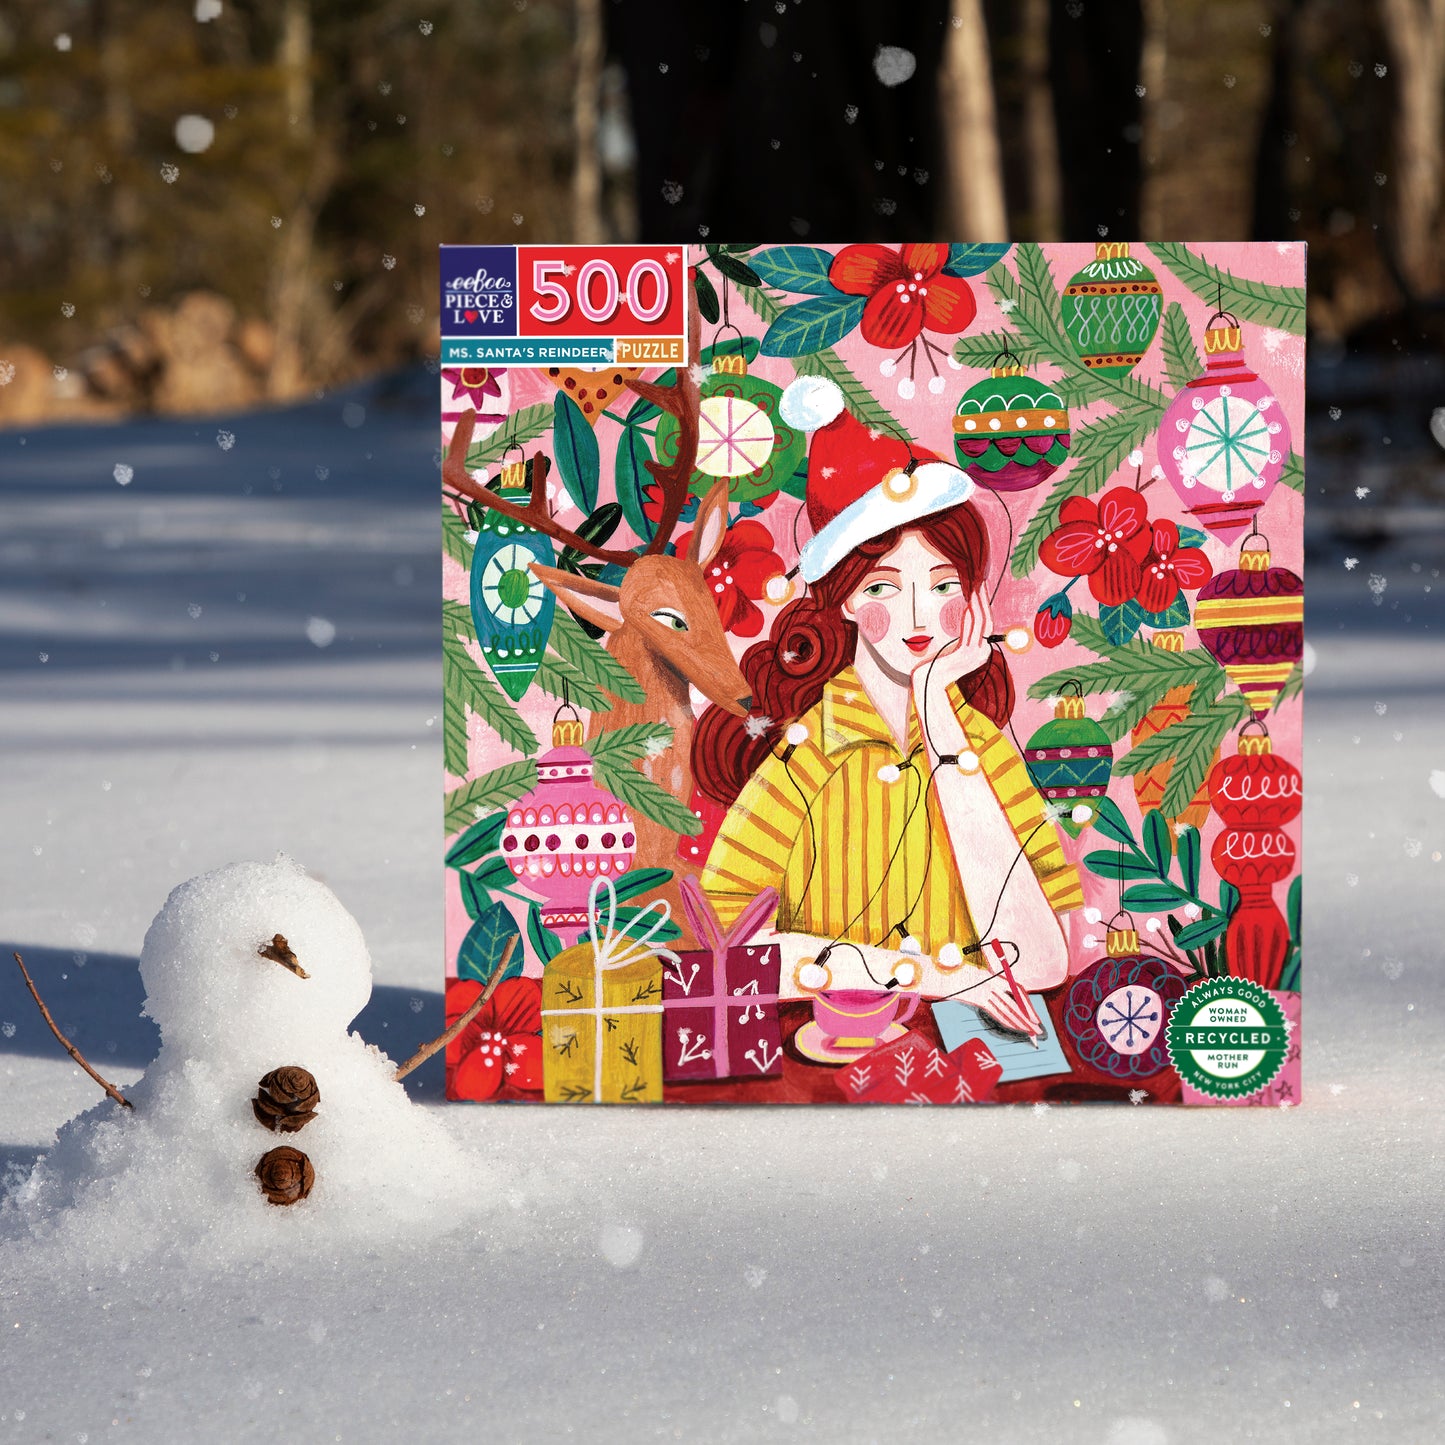 Ms. Santa's Reindeer 500 Piece Square Jigsaw Puzzle | Unique Gifts for Women